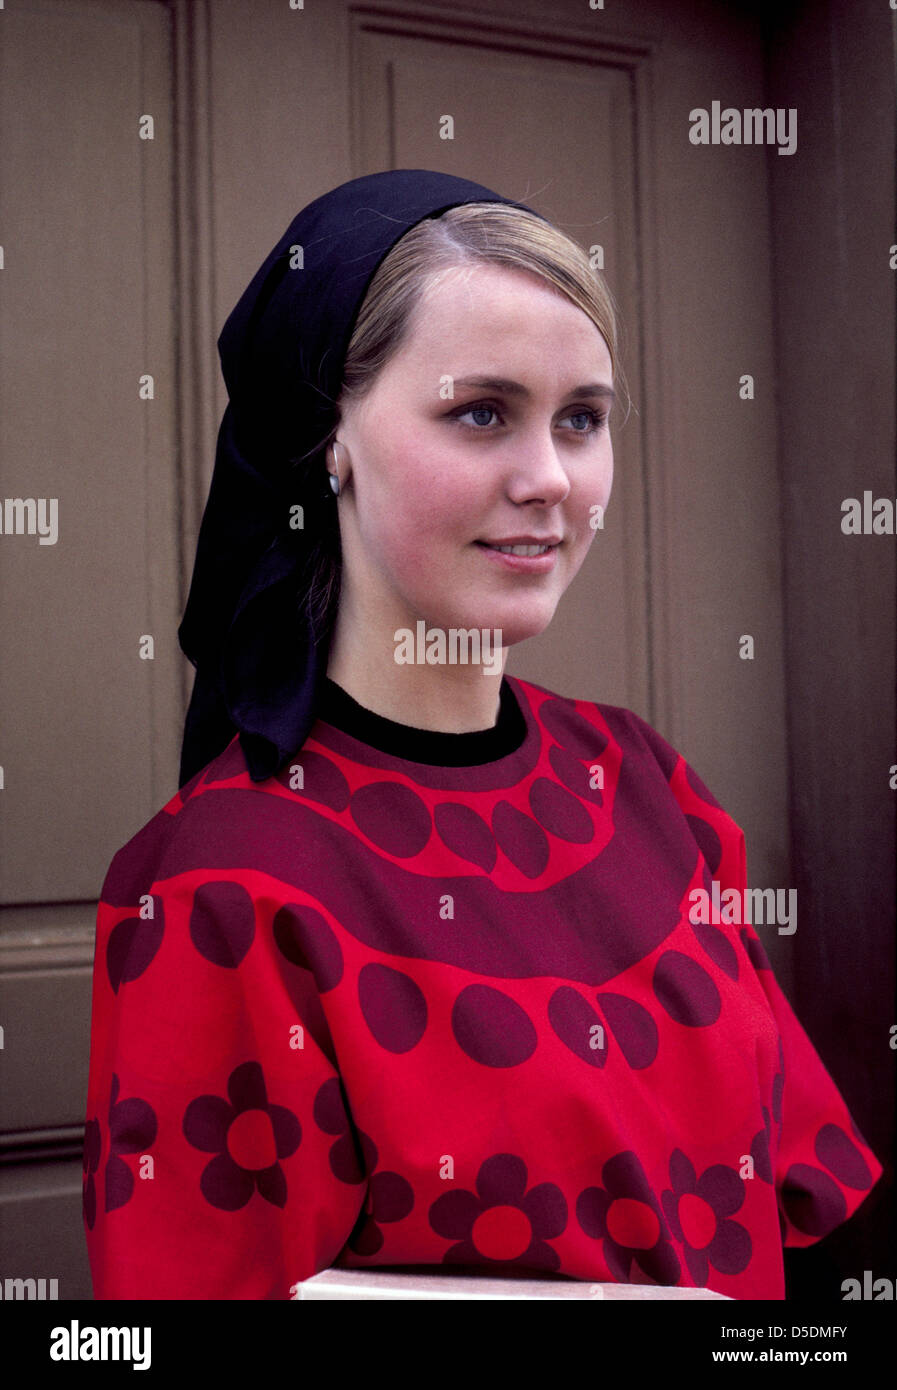 A pretty Norwegian girl wearing a dark headscarf and a colorful blouse poses for an informal portrait in Scandinavia. Stock Photo